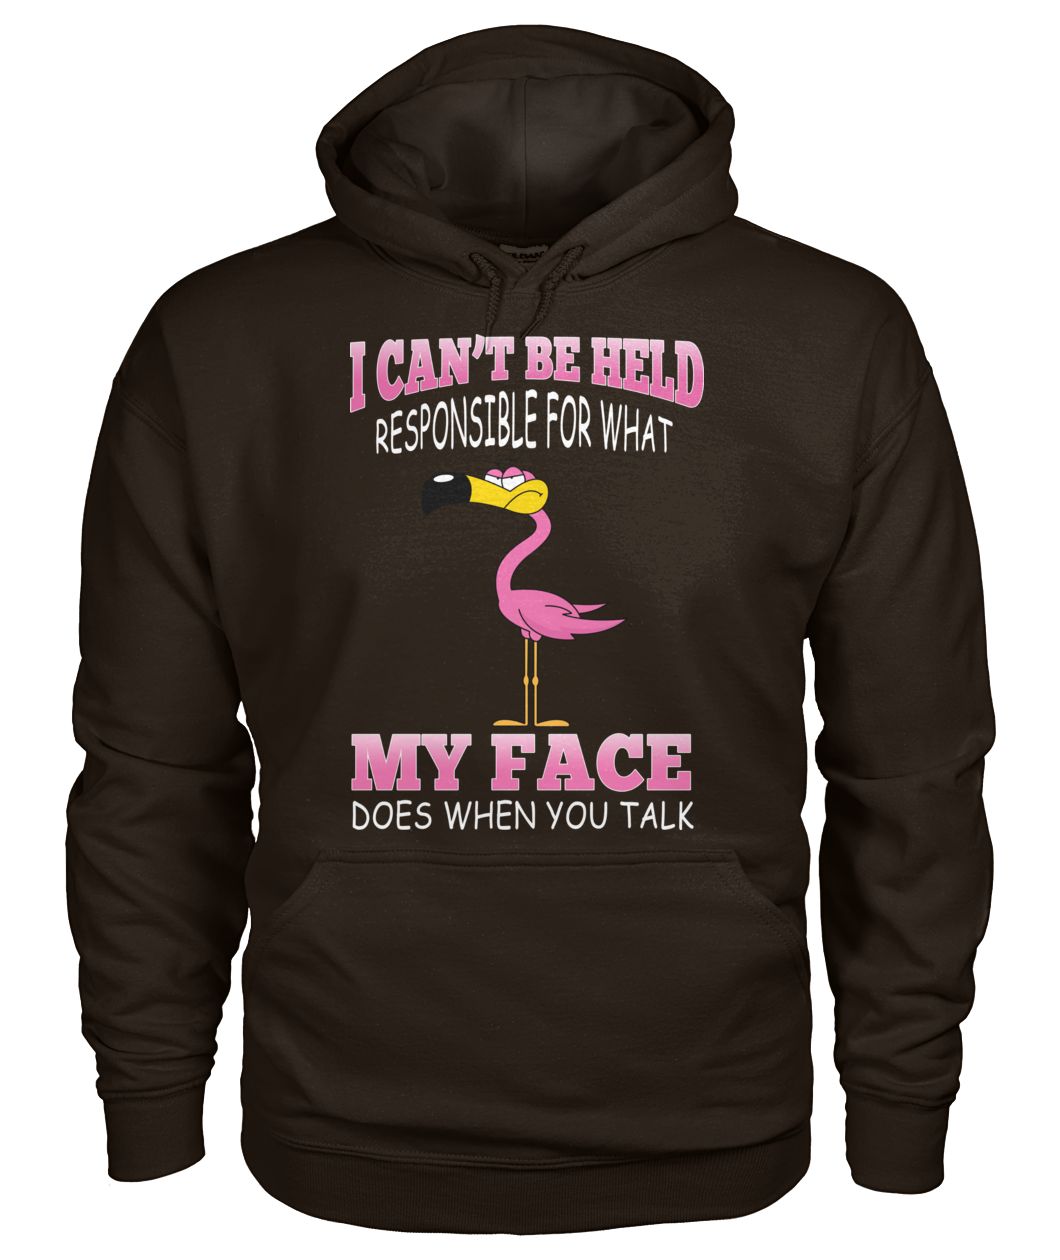 Flamingo I can't be held responsible for what my face gildan hoodie